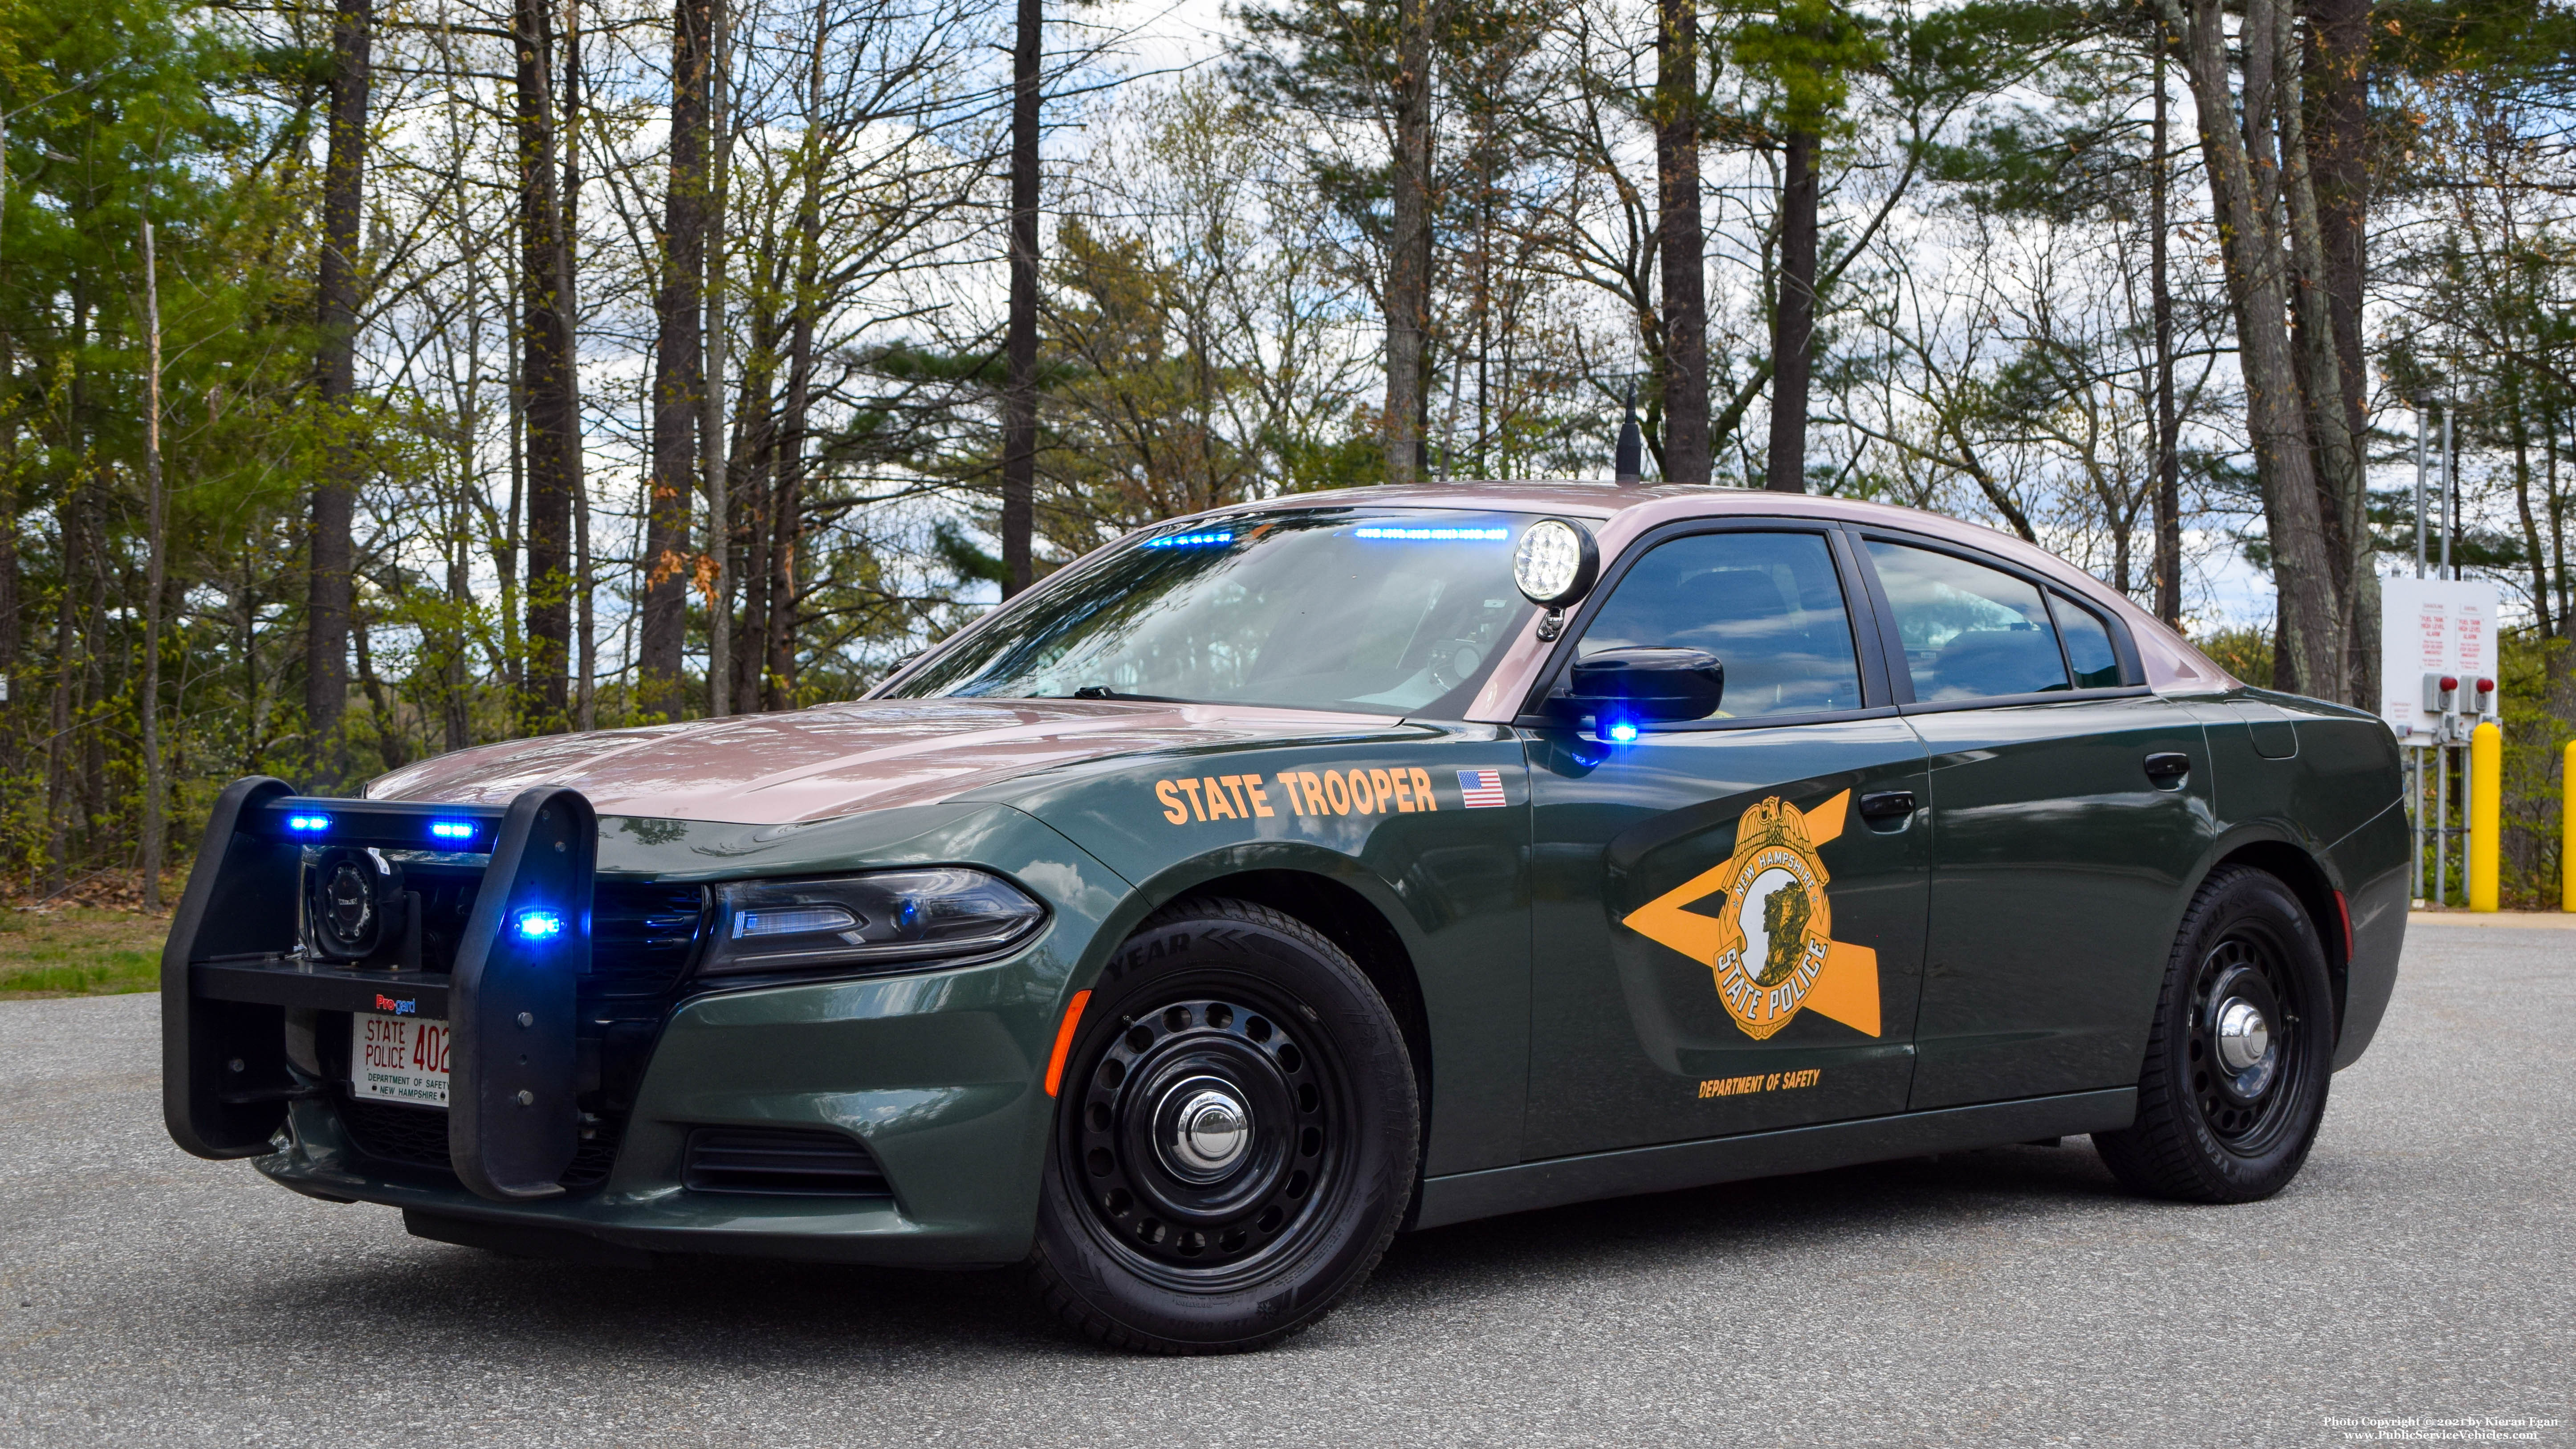 A photo  of New Hampshire State Police
            Cruiser 402, a 2015-2019 Dodge Charger             taken by Kieran Egan